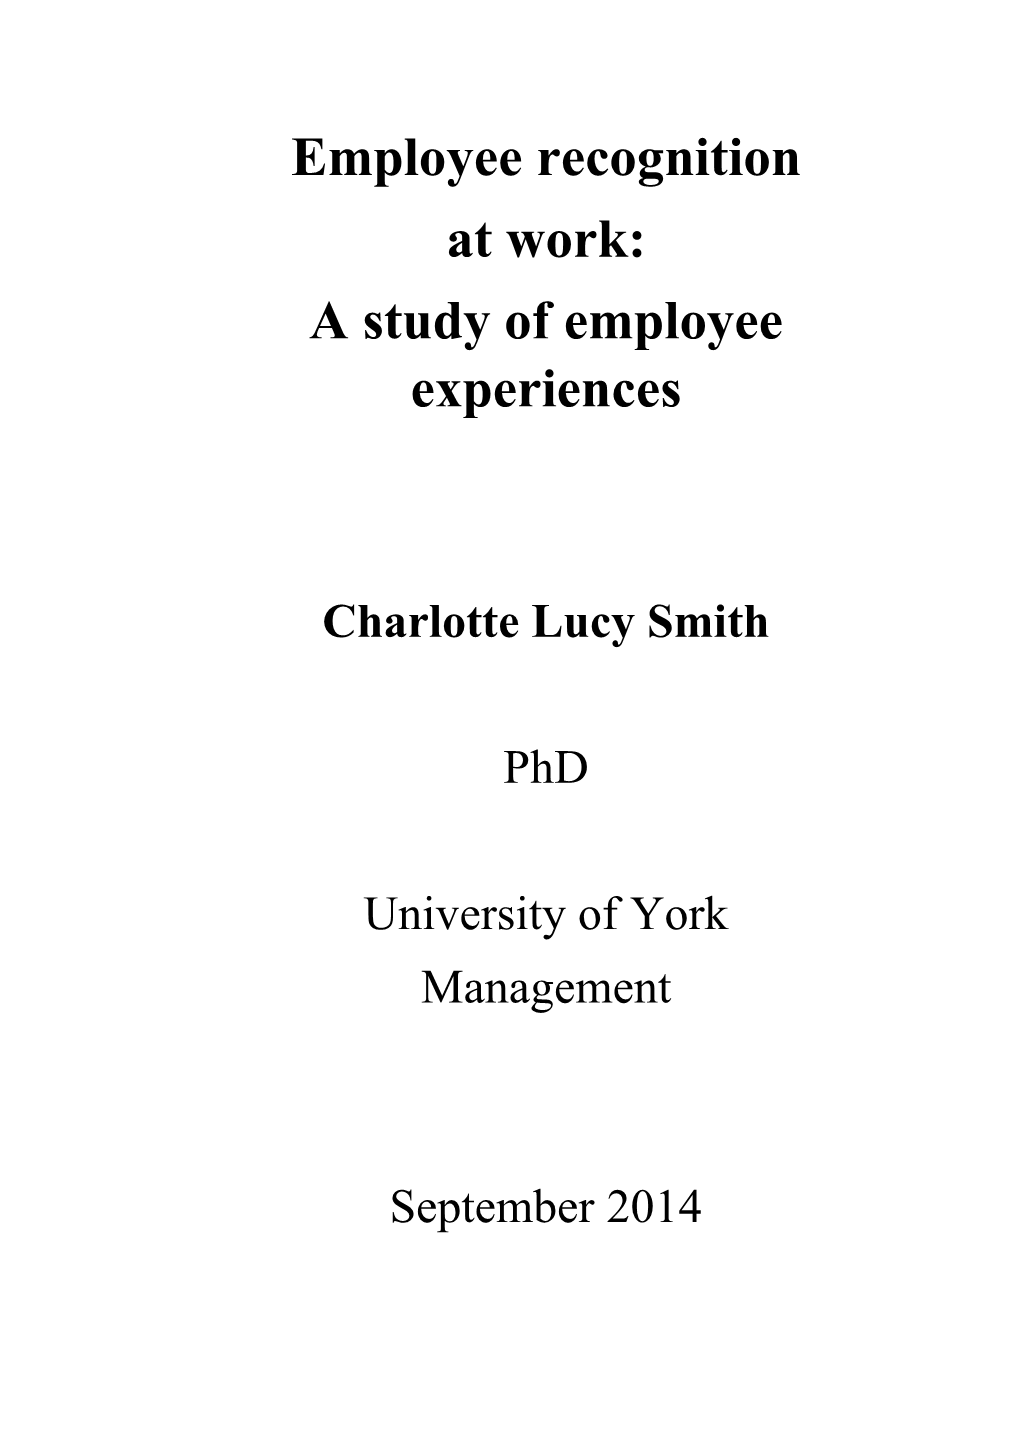 Employee Recognition at Work: a Study of Employee Experiences